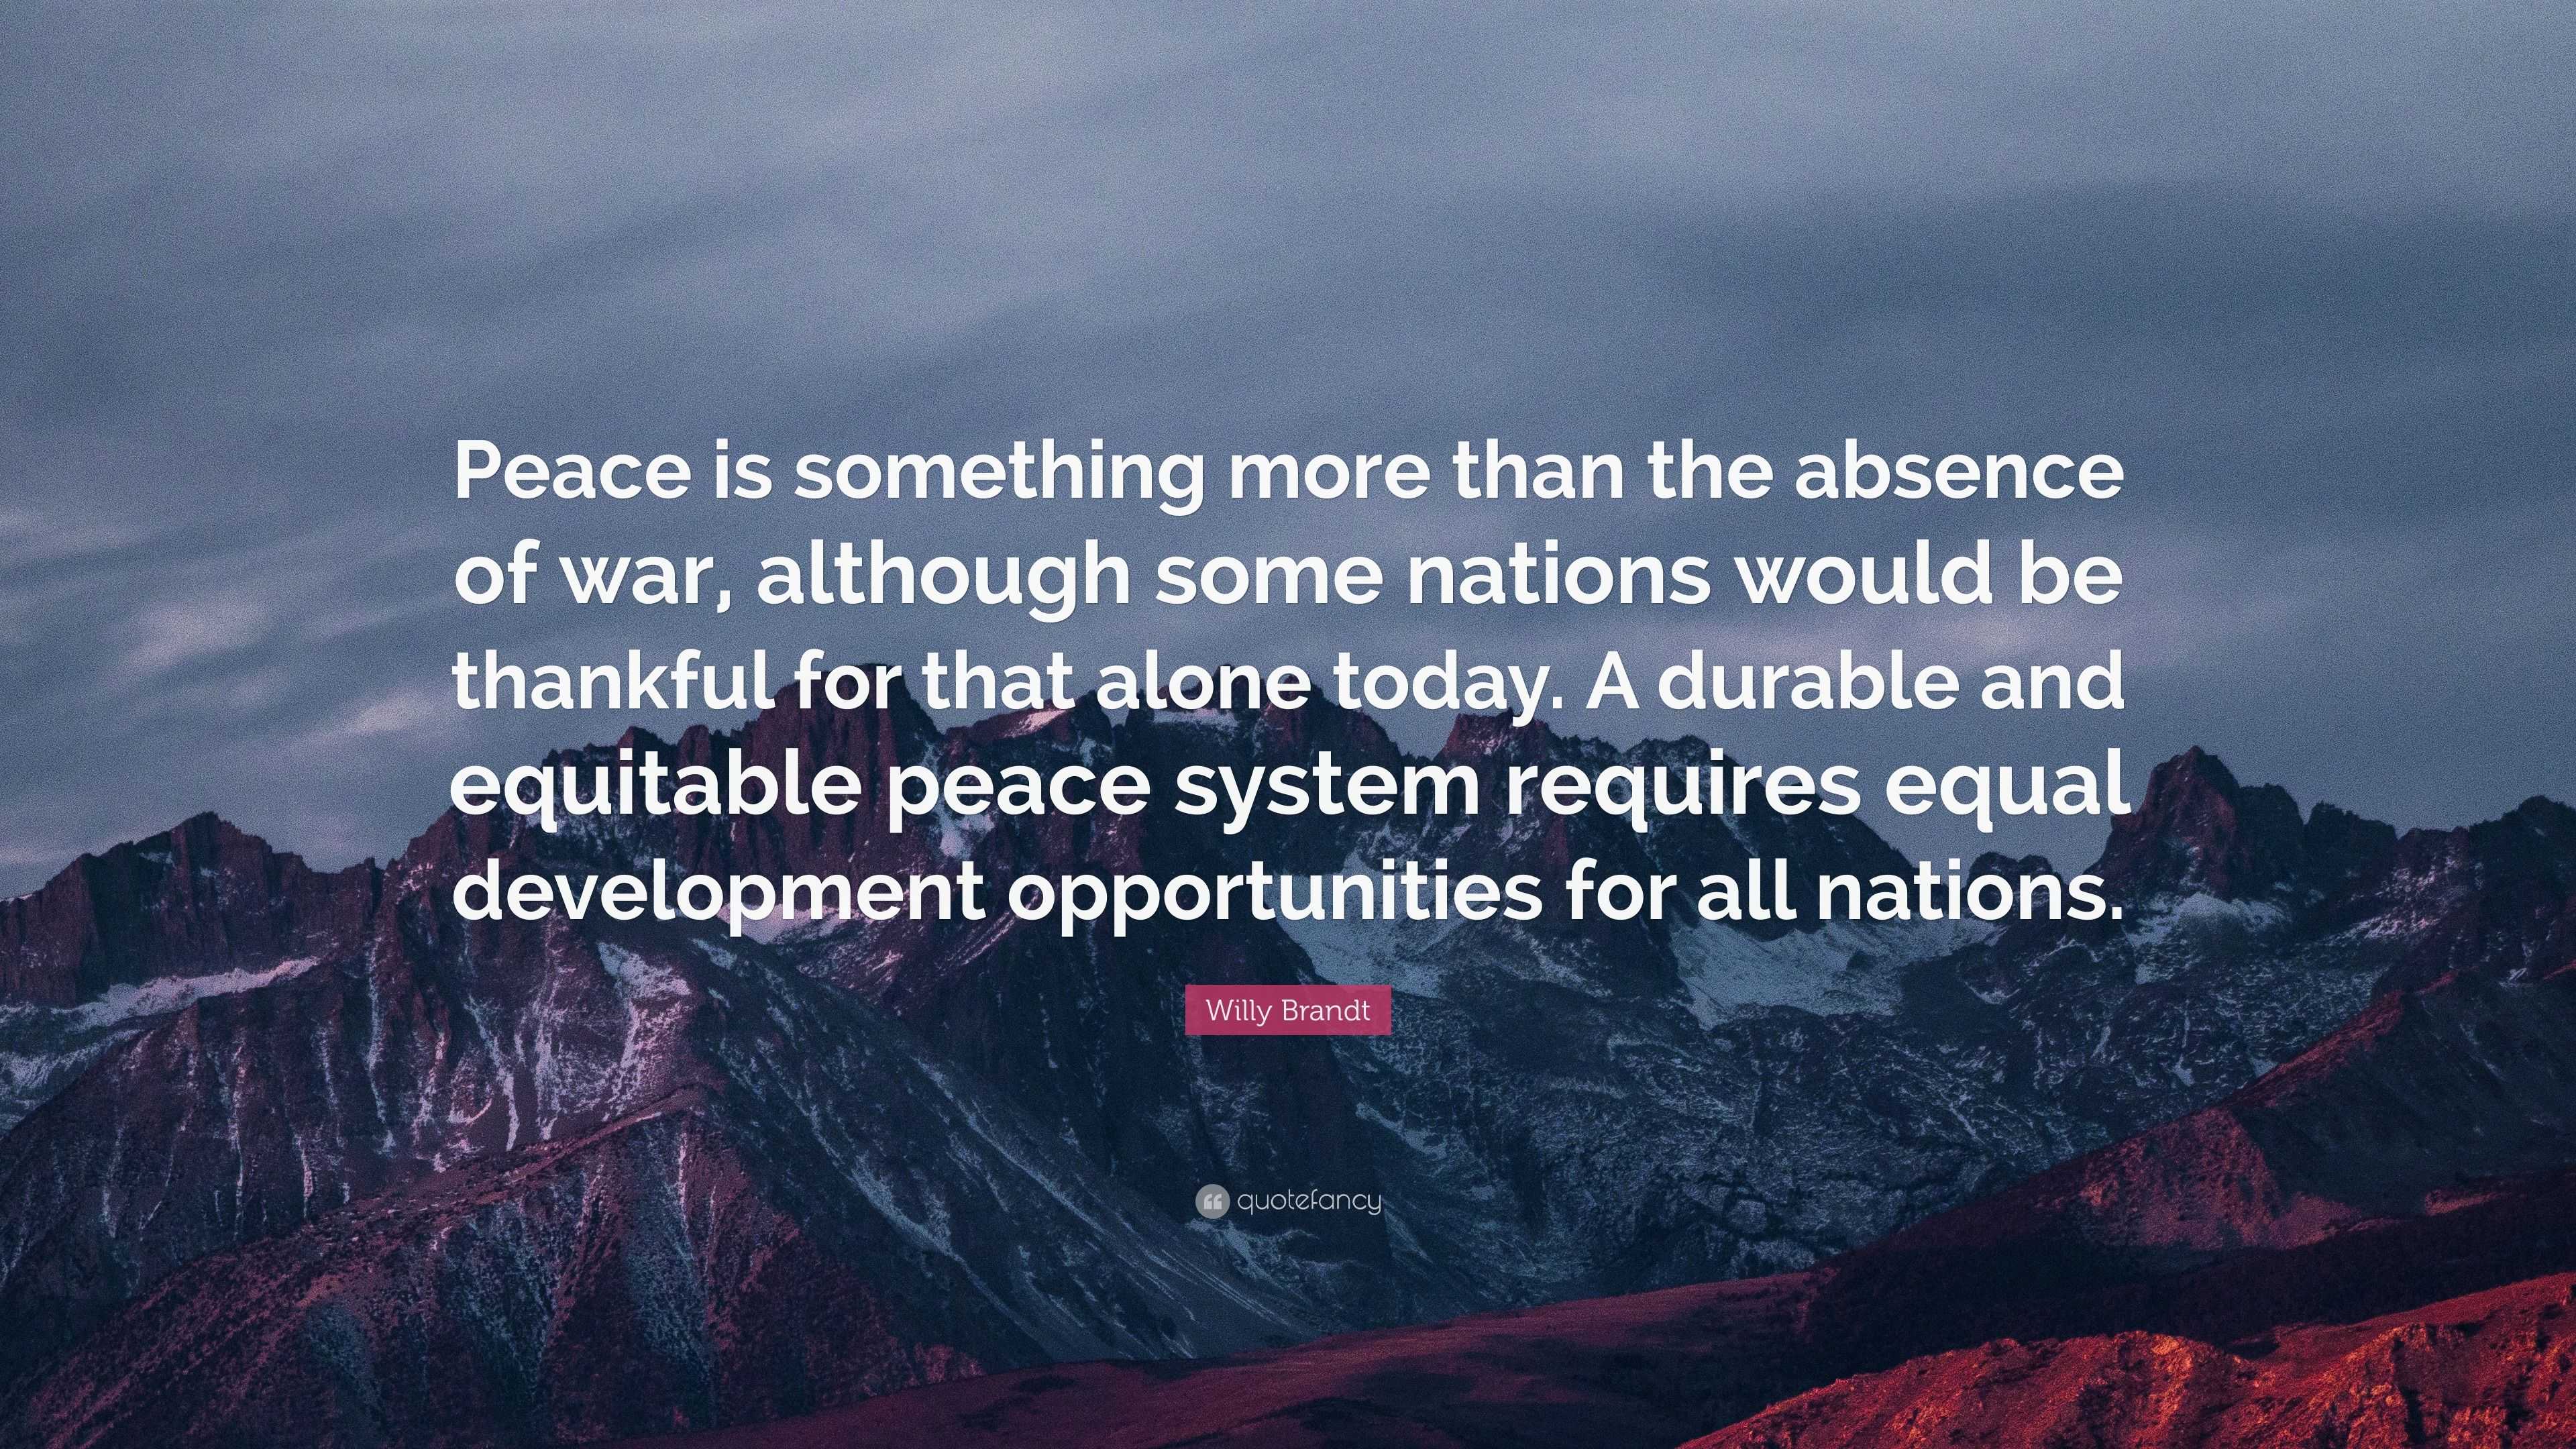 Willy Brandt Quote: “Peace is something more than the absence of war ...